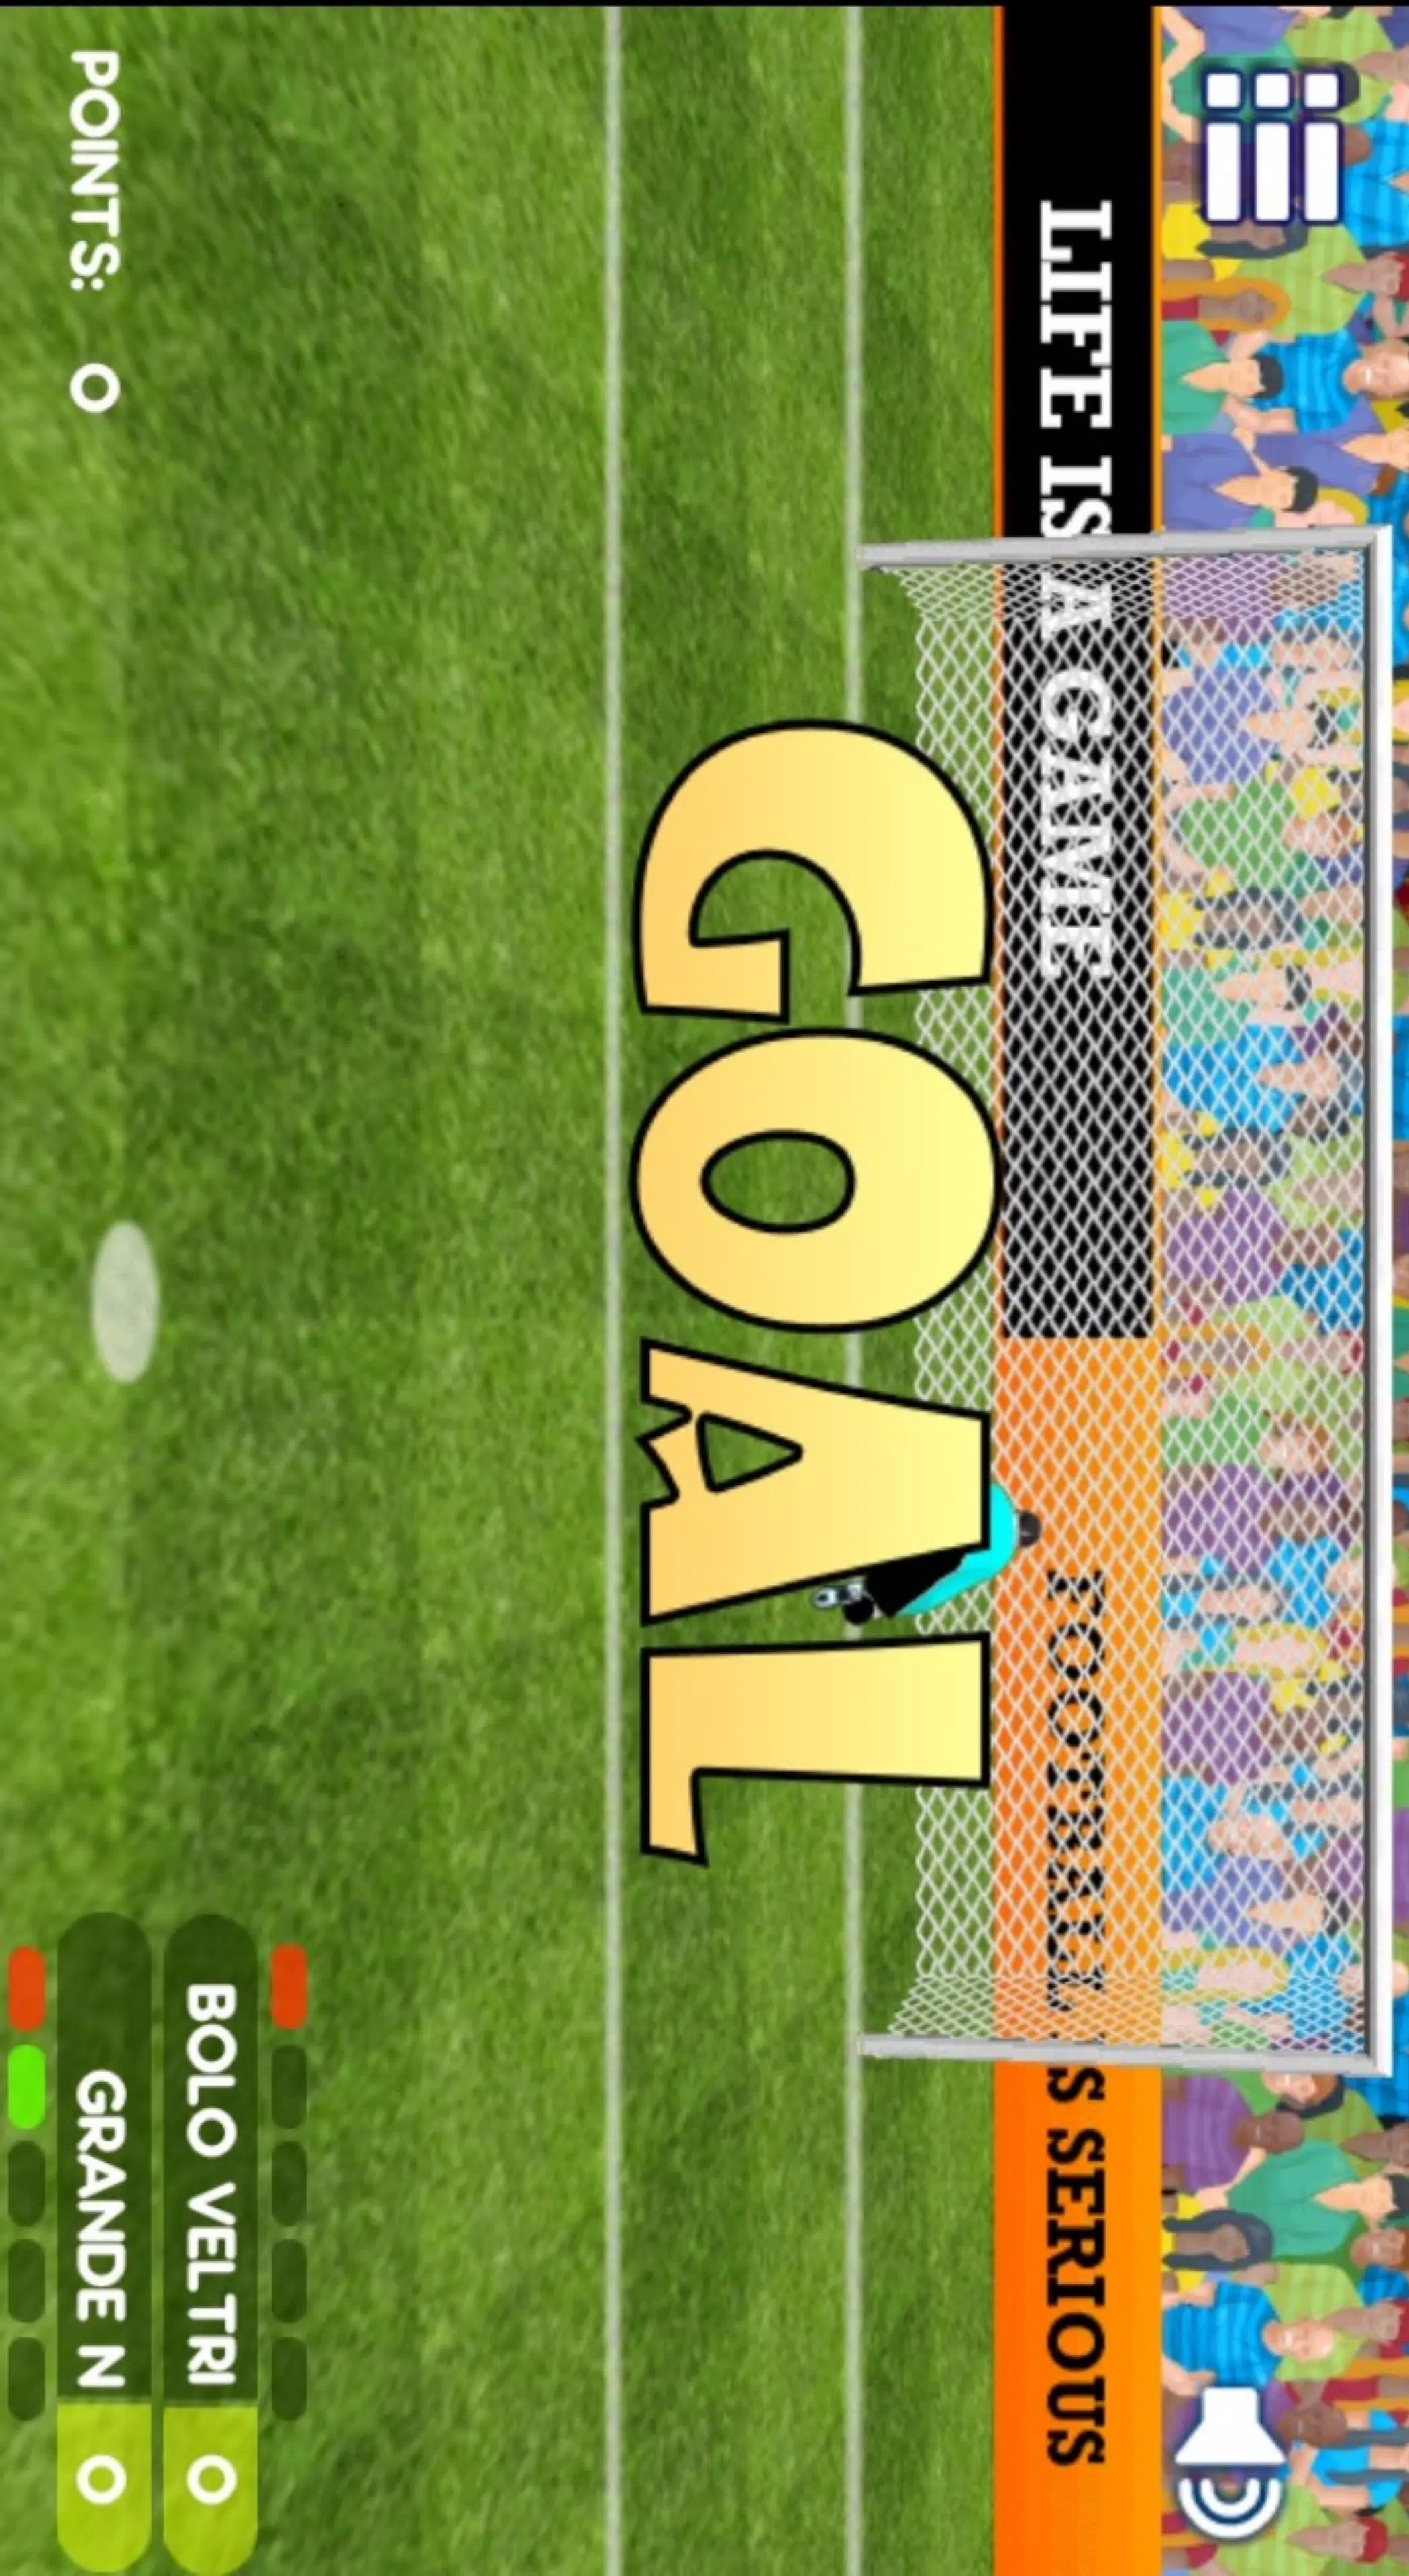 Penalty Shooters 2 (Football) - APK Download for Android